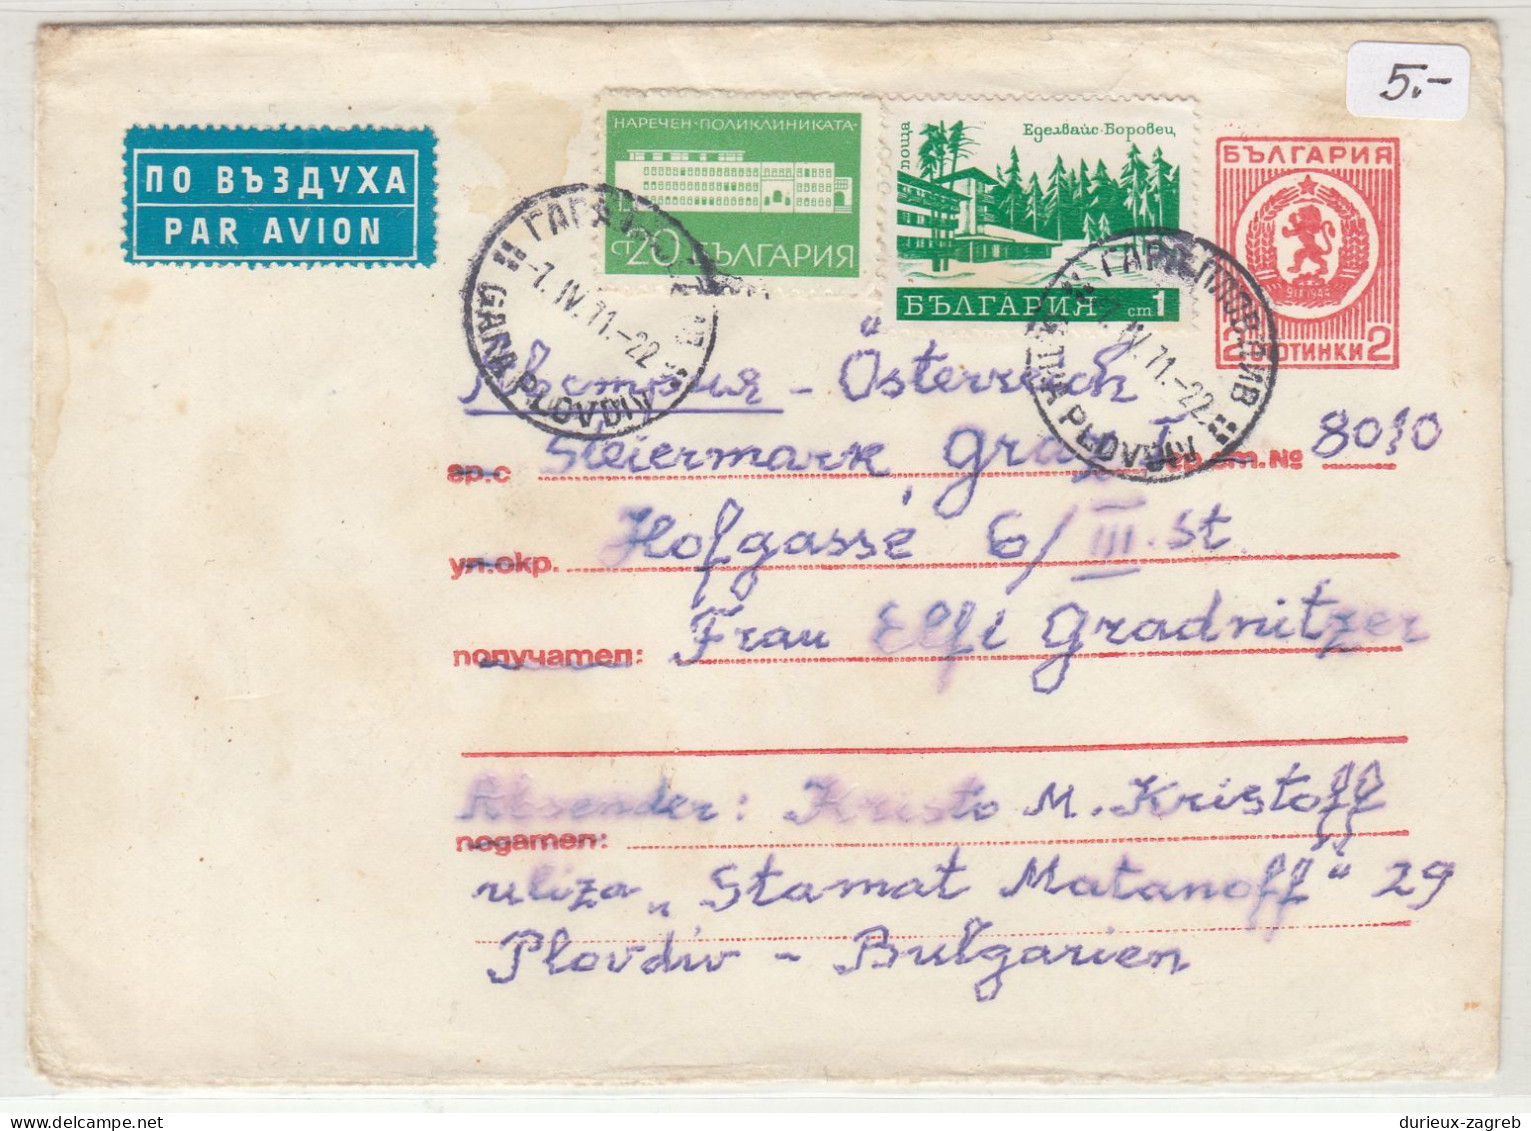 Bulgaria Postal Stationery Letter Cover Posted Air Mail 1971 Plovdiv To Graz - Uprated B240401 - Covers